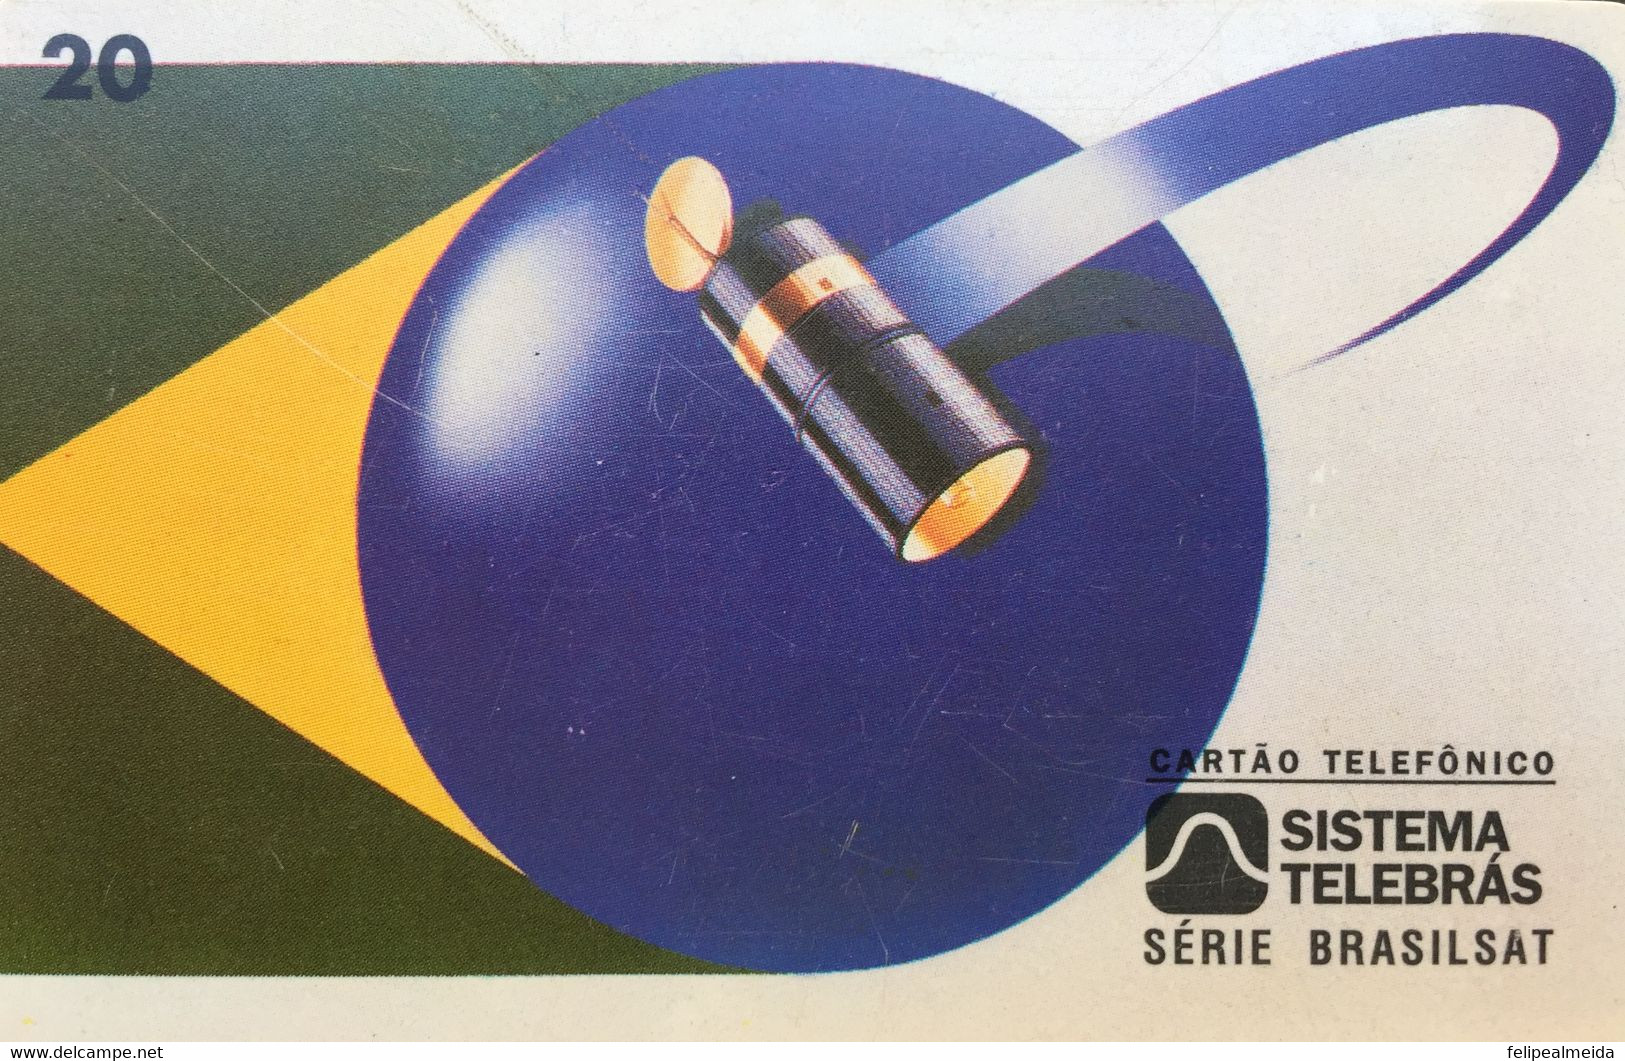 Phone Card Made By Telebras In 1997 - Series Brasilsat - On February 28, 1994, Brazil Launched The Second Generation Of - Space